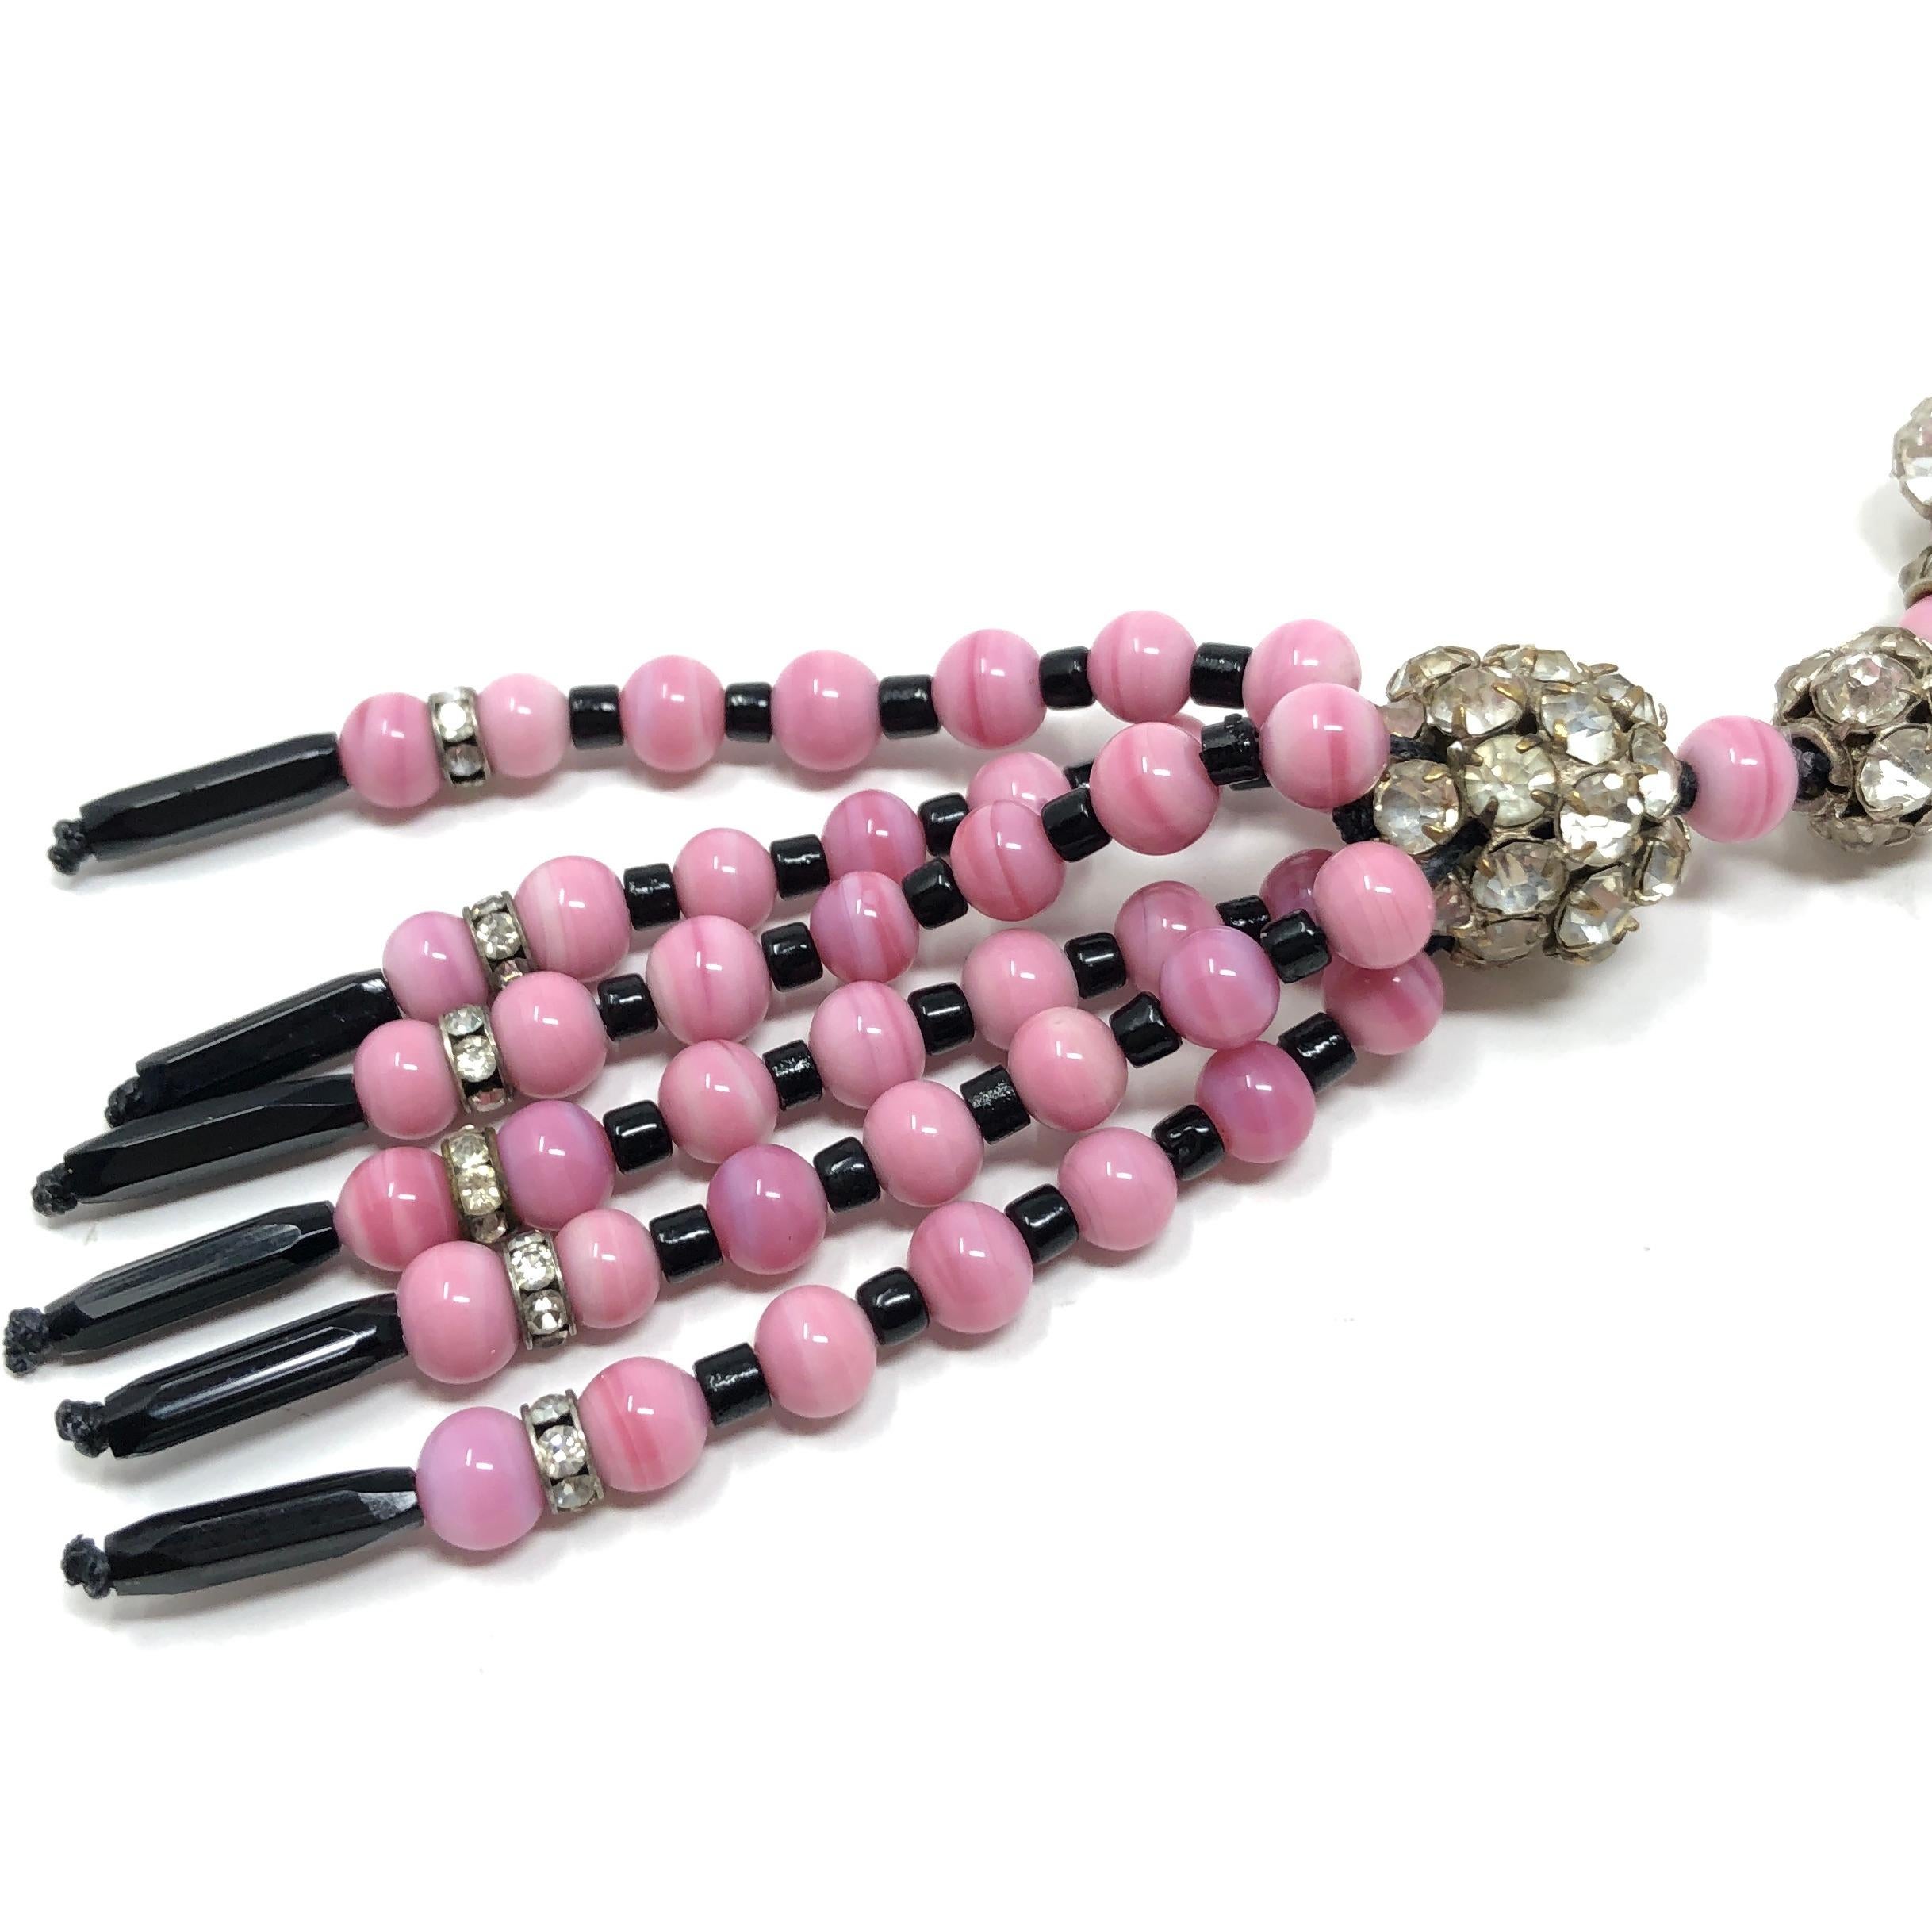 1920s Art Deco Pink and Black Glass Bead Rhinestone Vintage Flapper Necklace For Sale 1